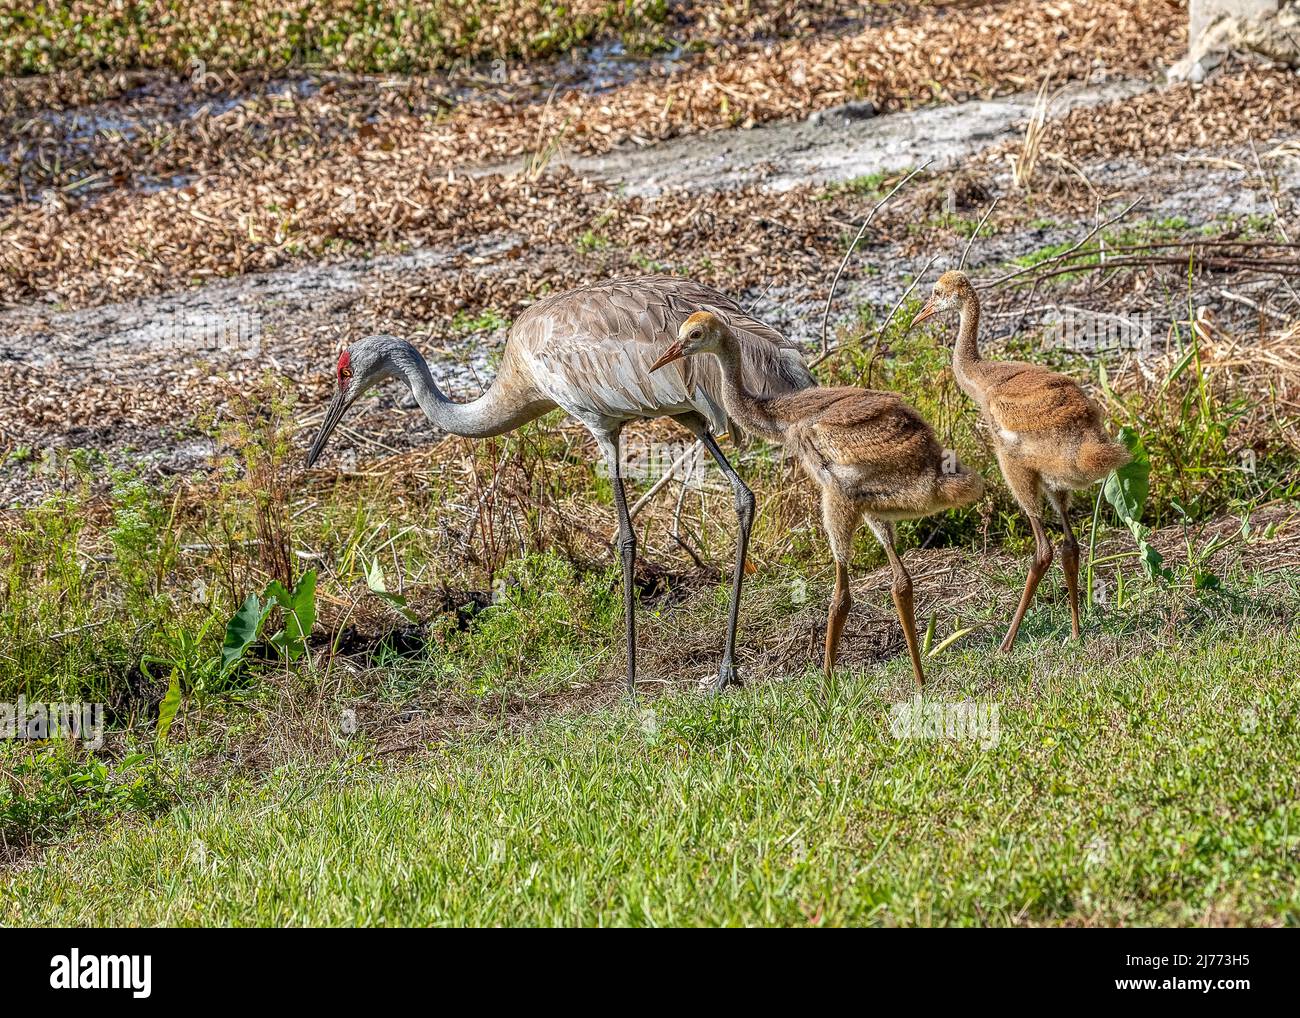 Sandhill cranes learning how to forage for food together Stock Photo